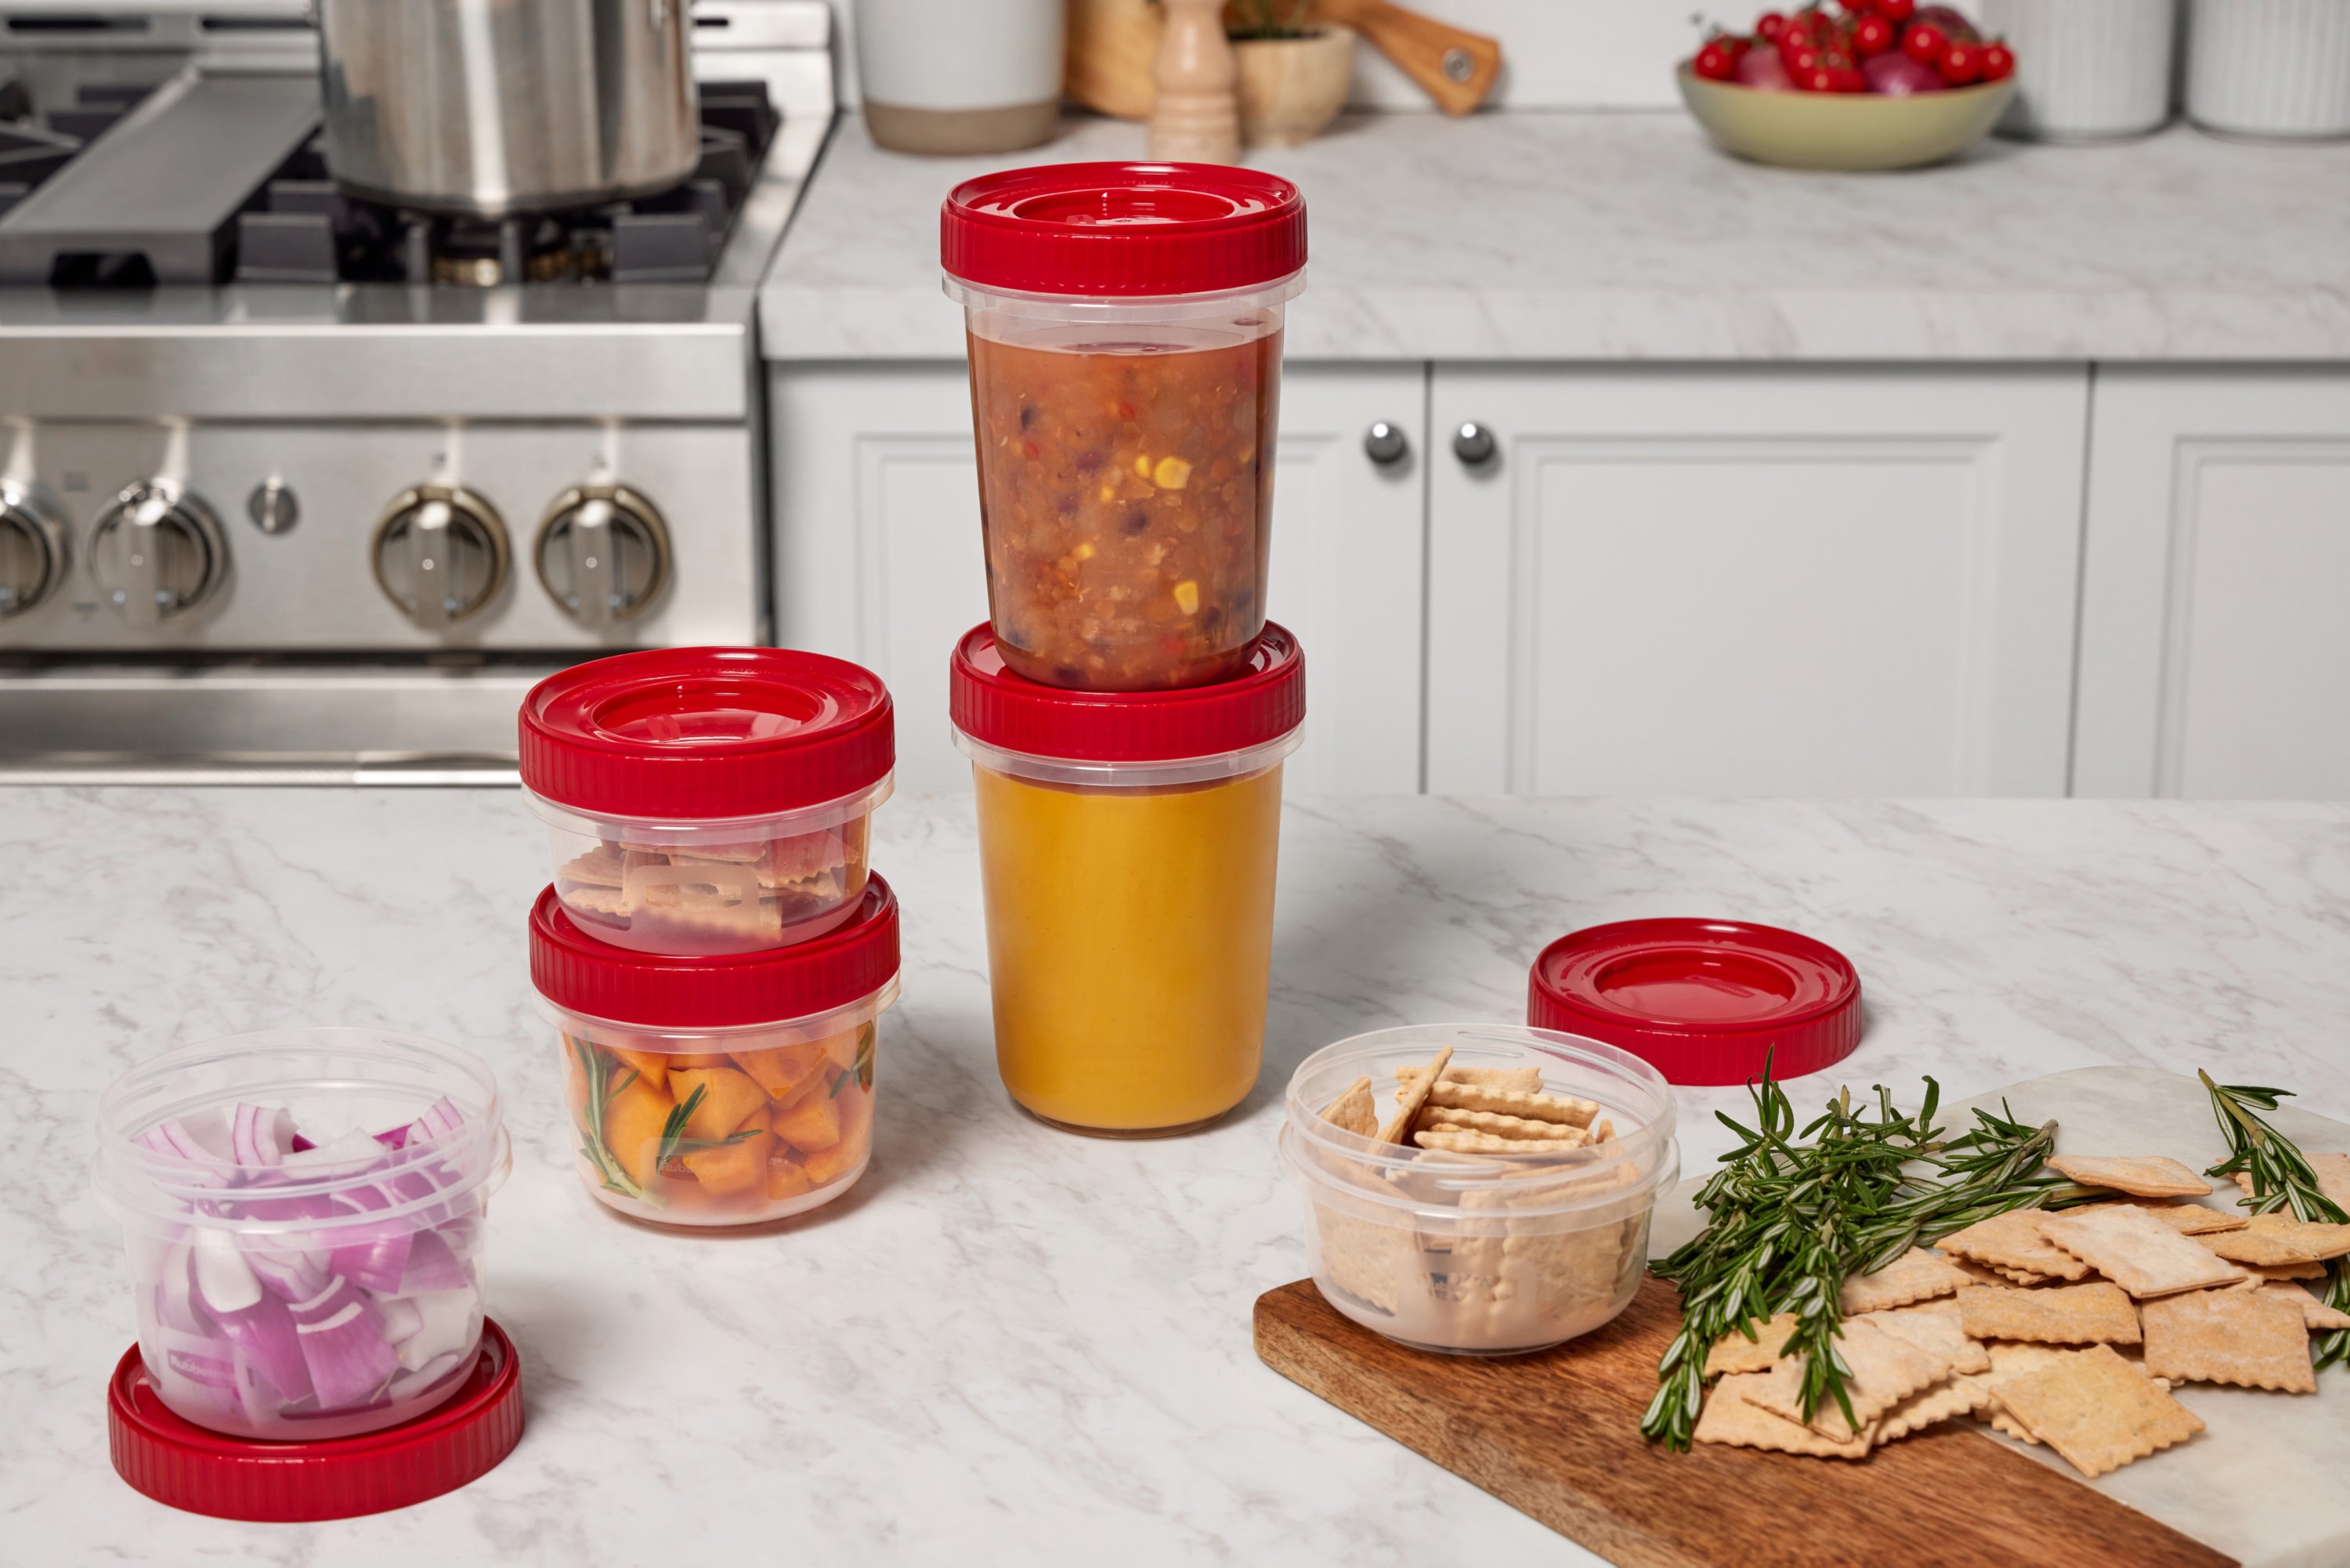 Rubbermaid Twist Seal Take Alongs Containers for sale online